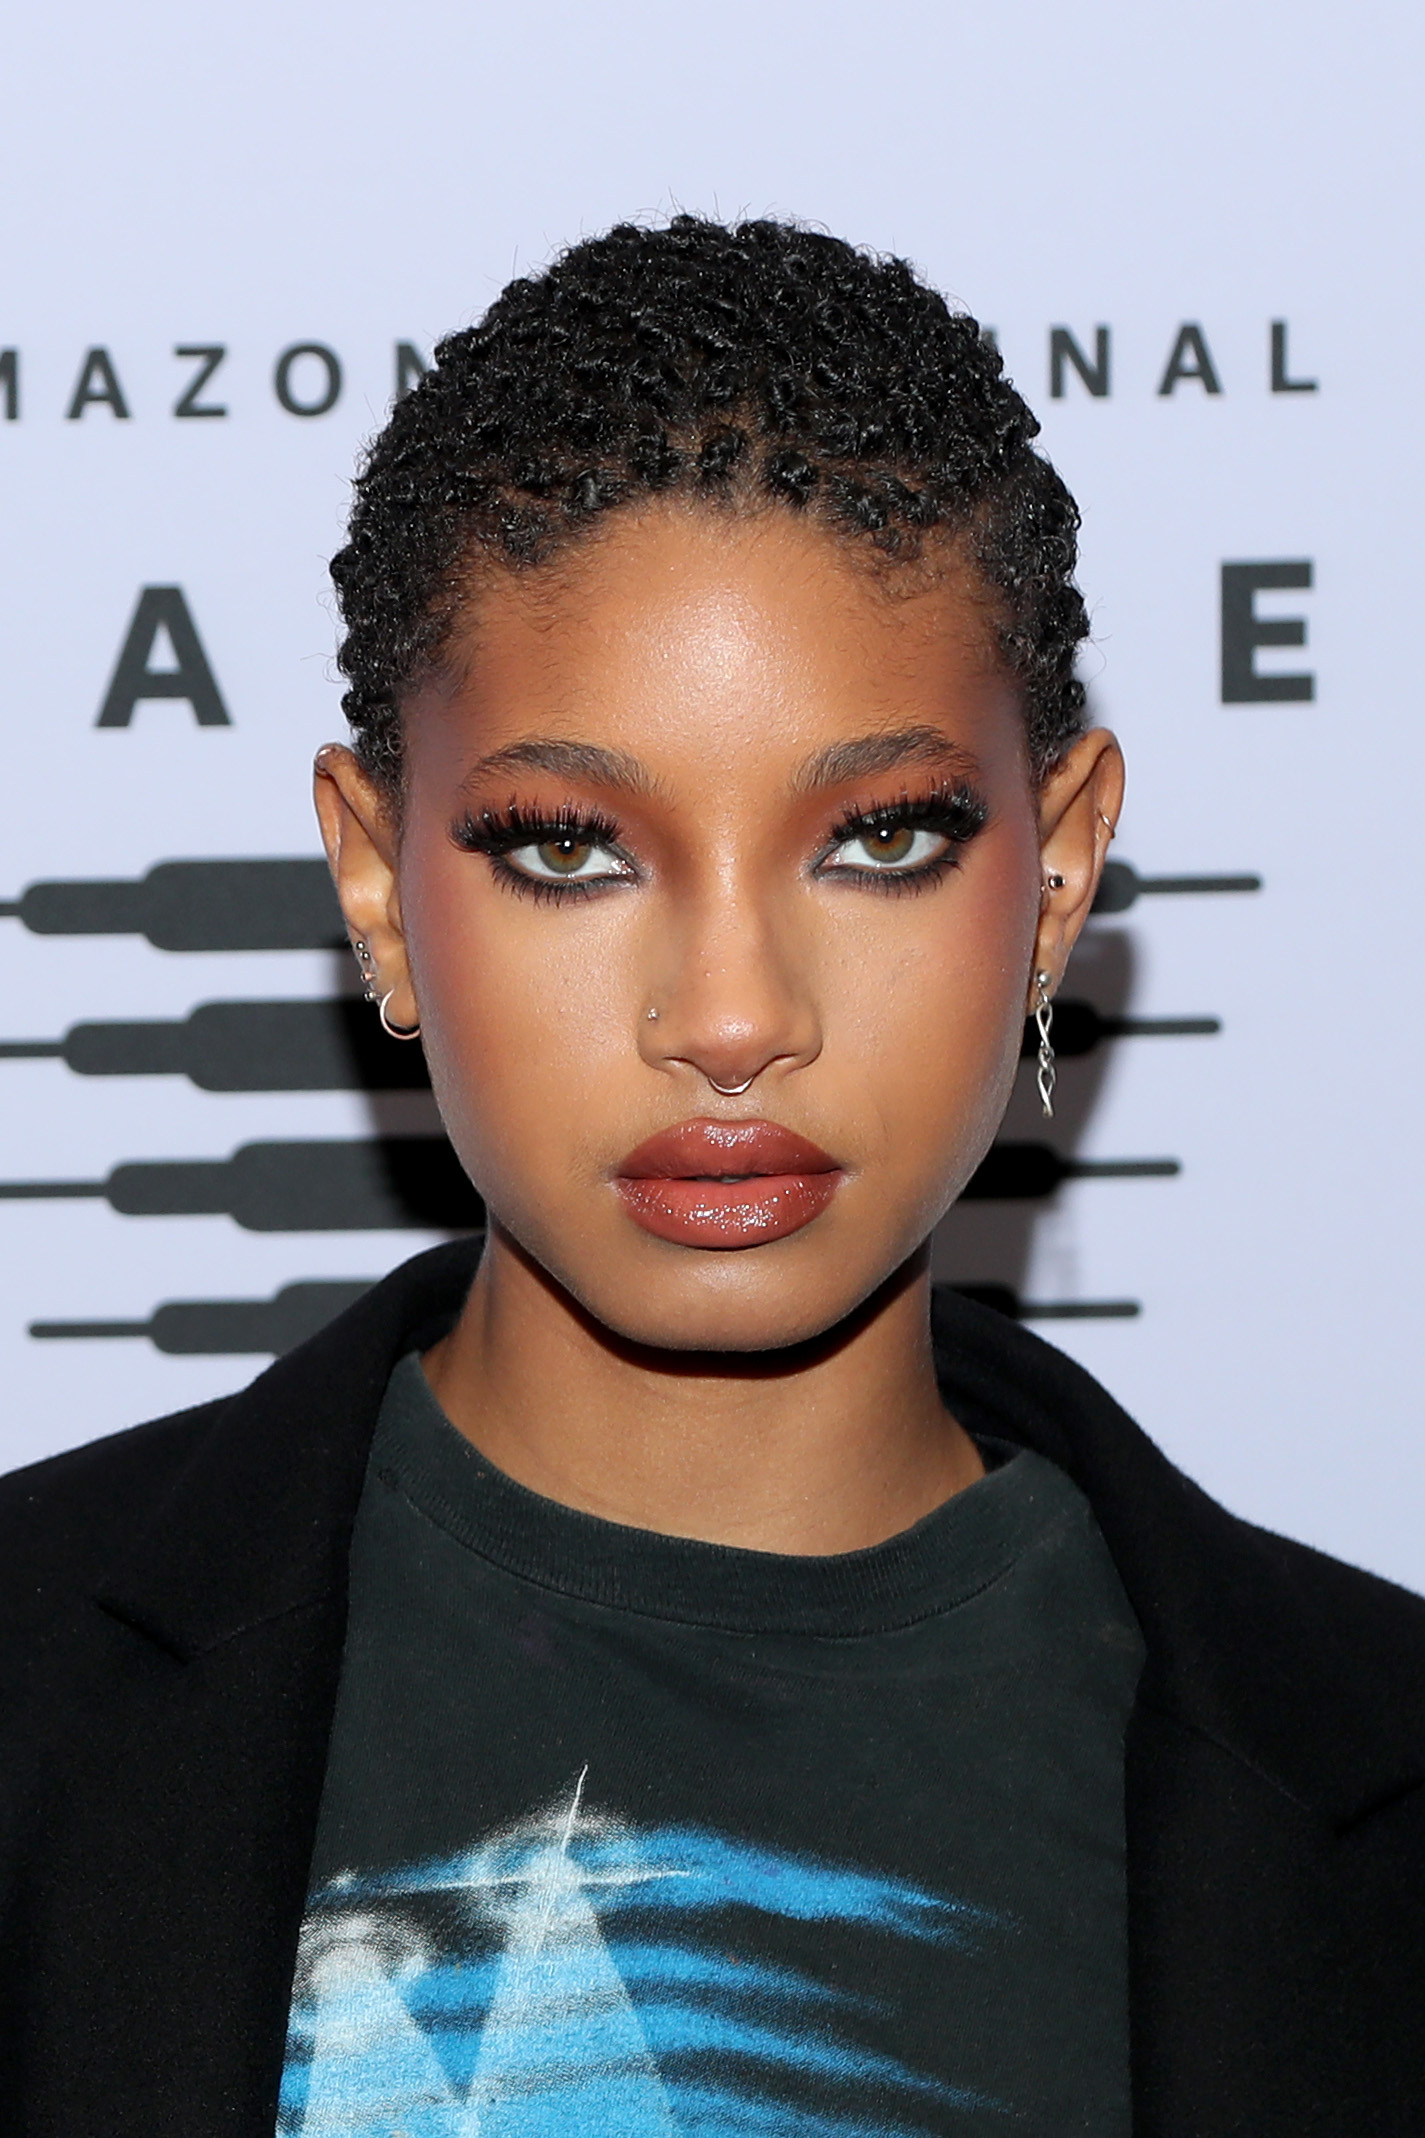 Willow Smith wearing a black blazer over a graphic tee at an event